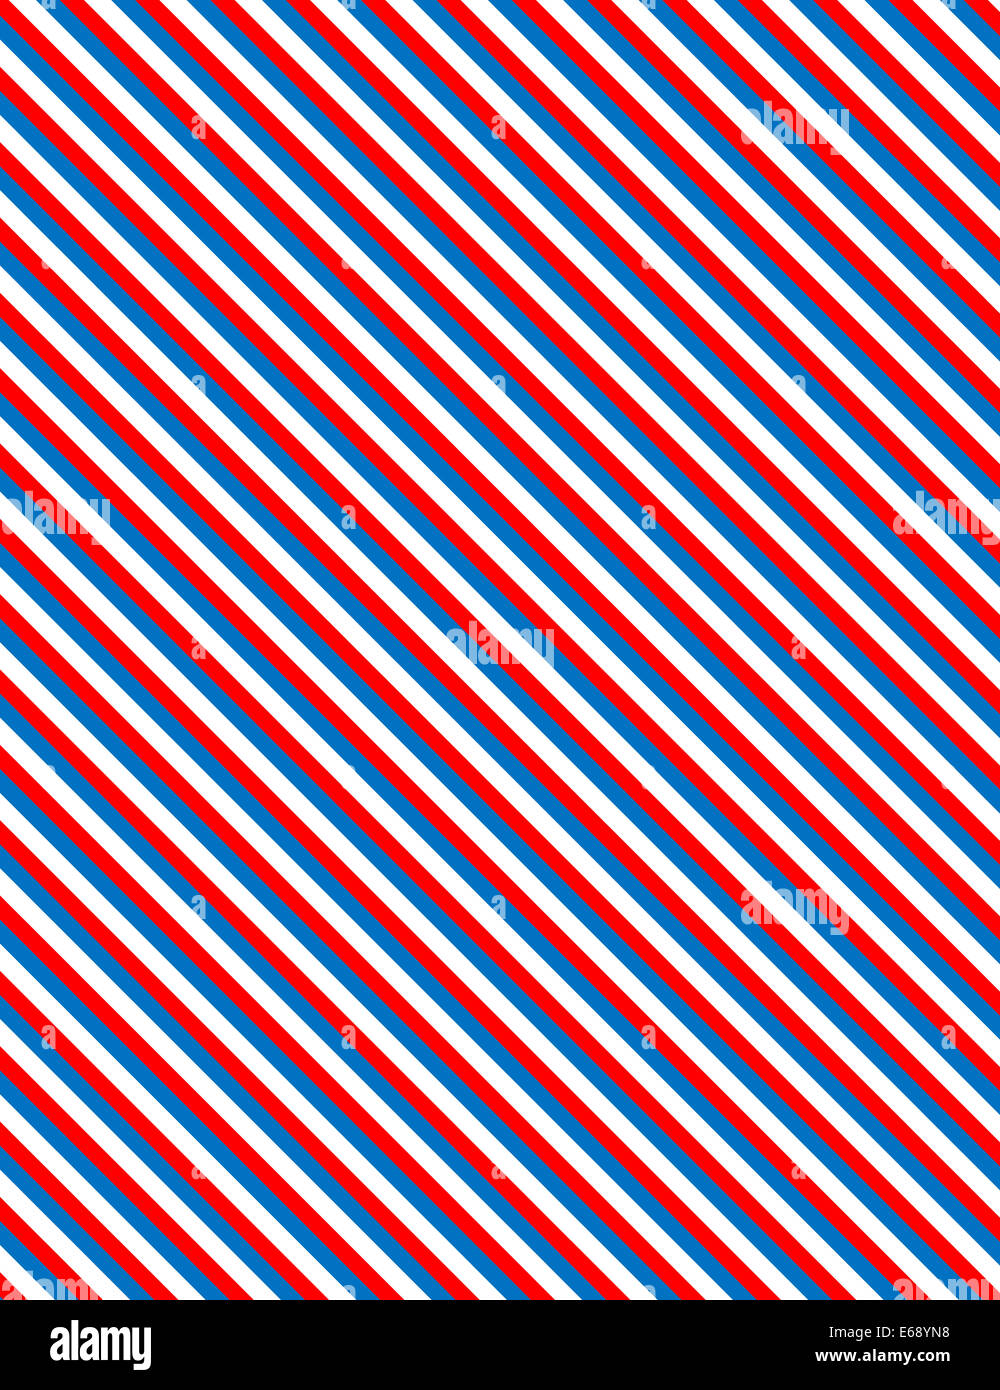 Red White And Blue Patriotic Diagonal Striped Background